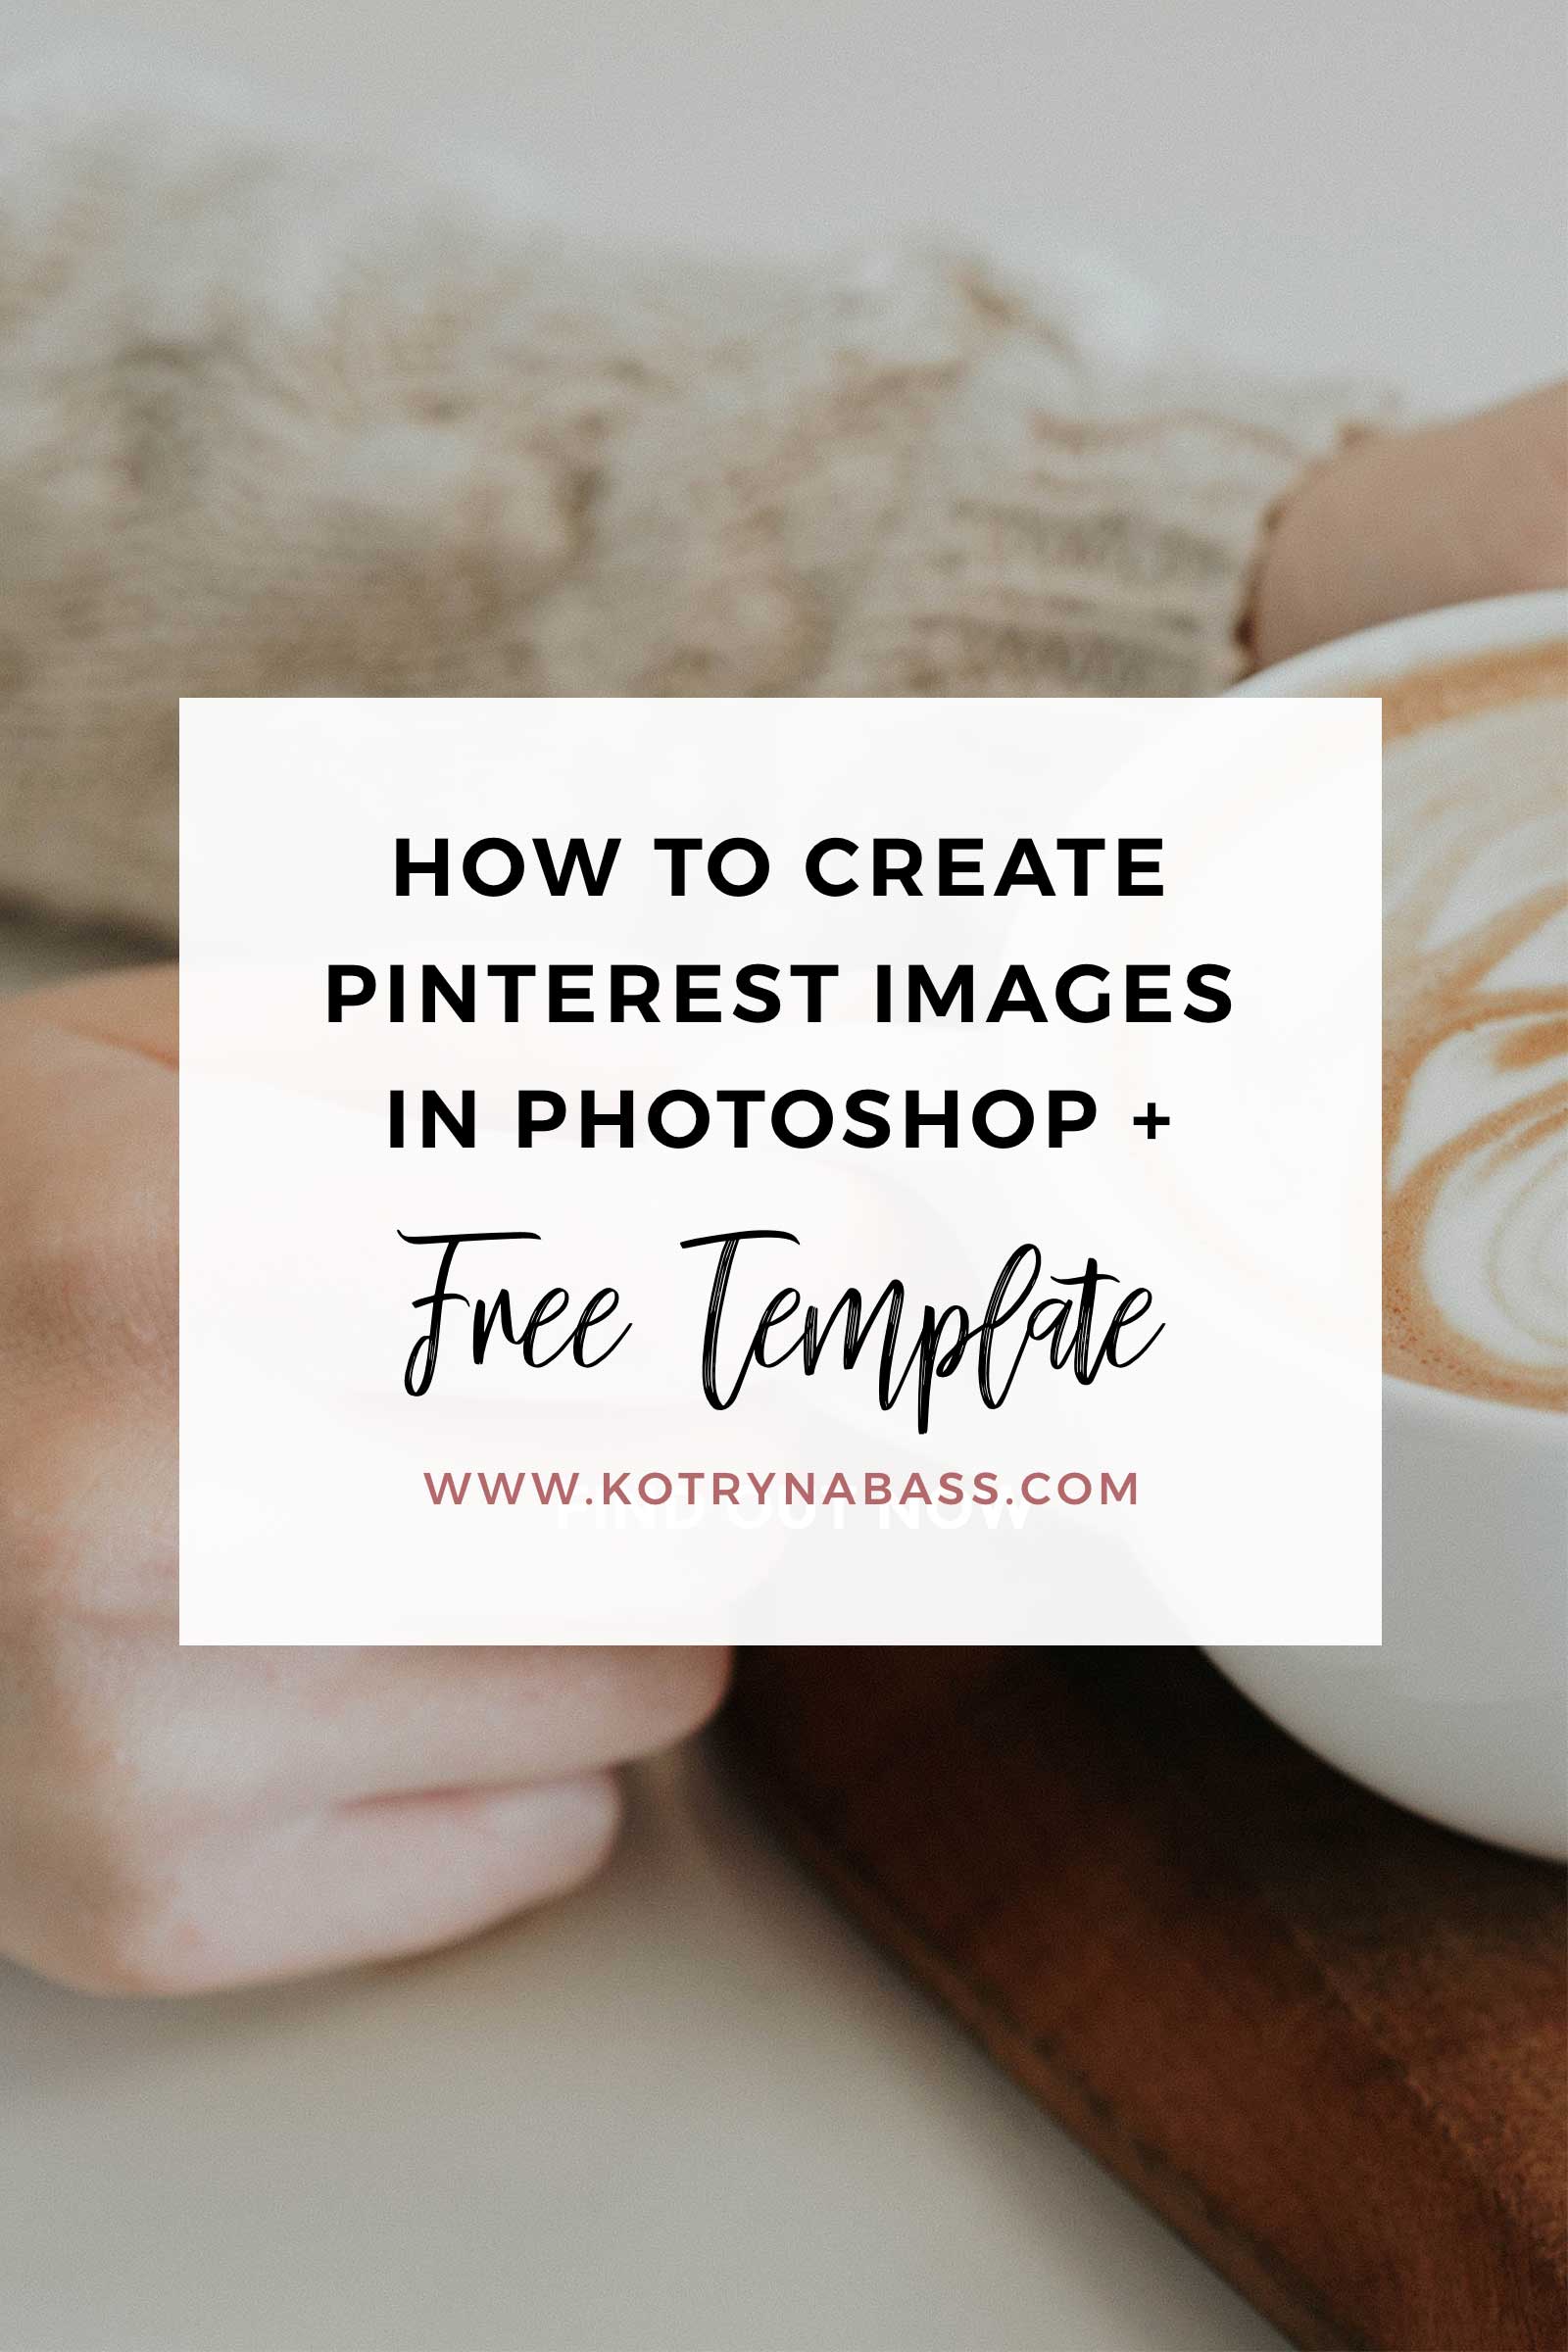 How To Create Pinterest Images In Photoshop (+ Free Template) - Kotryna ...